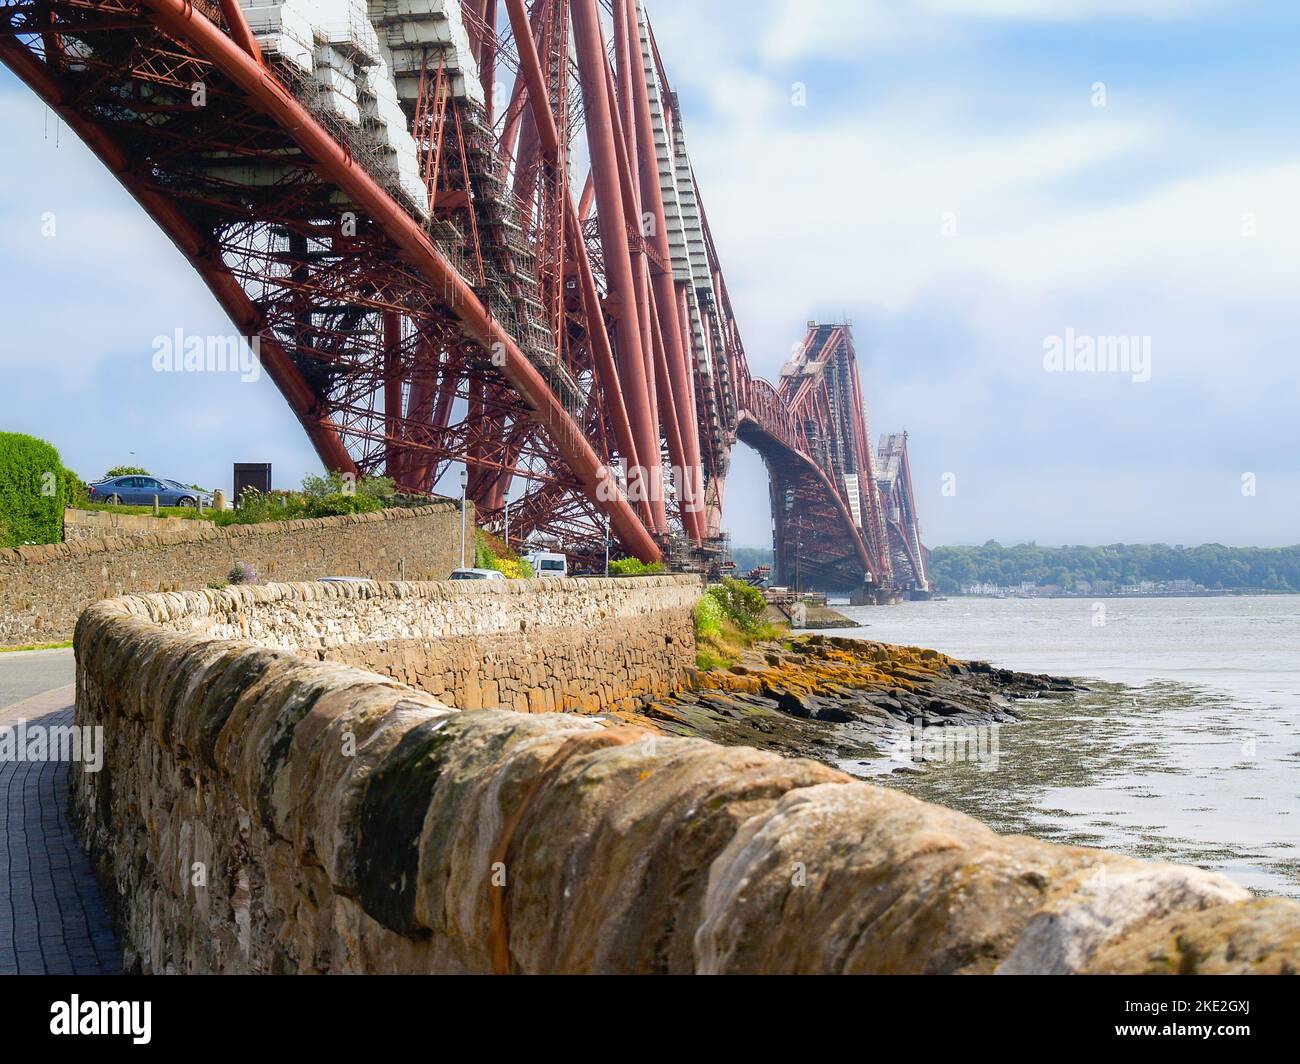 North Queensferry Railway Forth Bridge across Firth of Forth in Scotland. Stock Photo